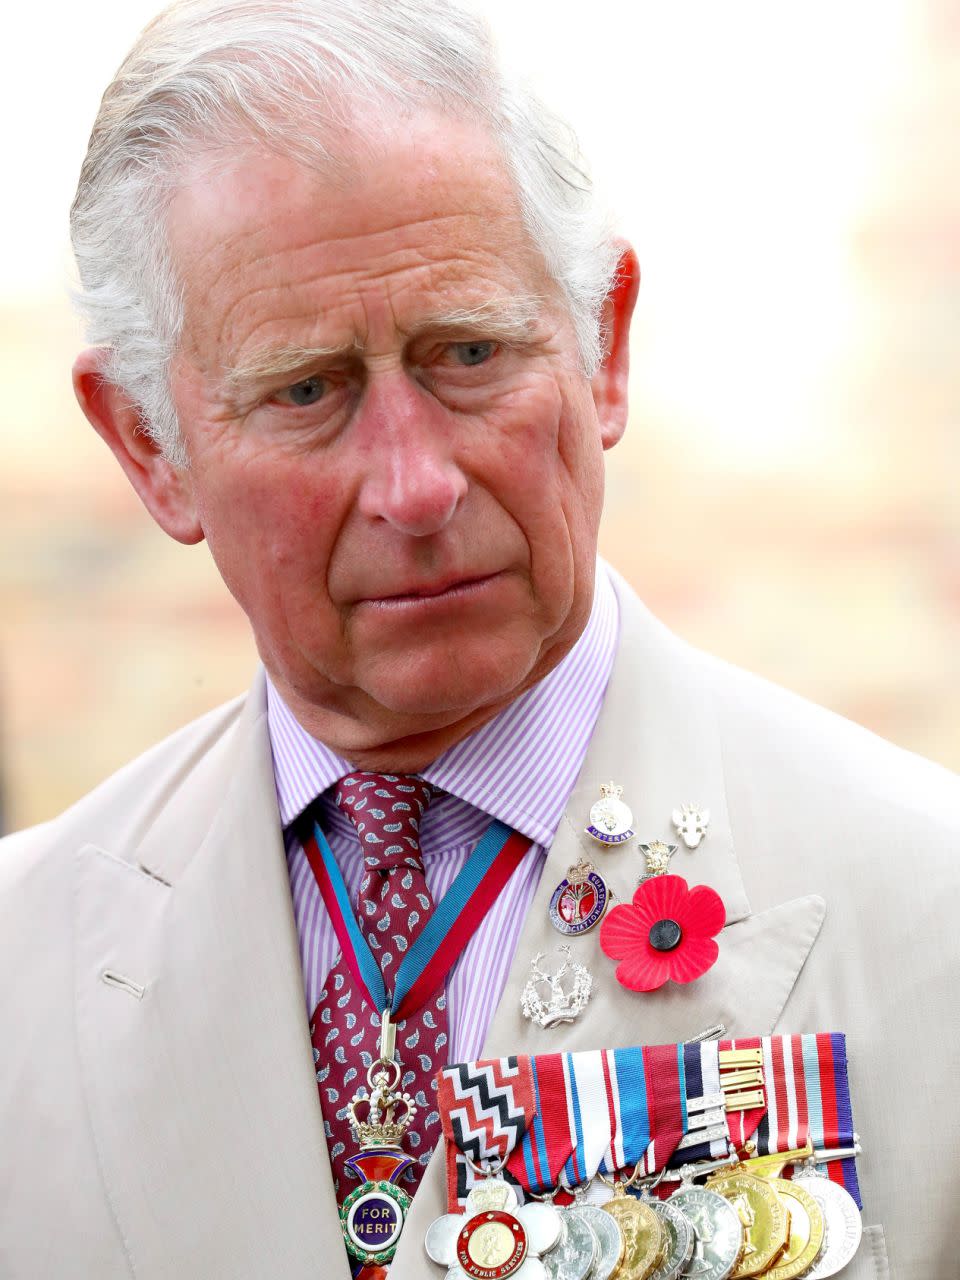 Royal sources say Charles is finding this week particularly hard. Source: Getty